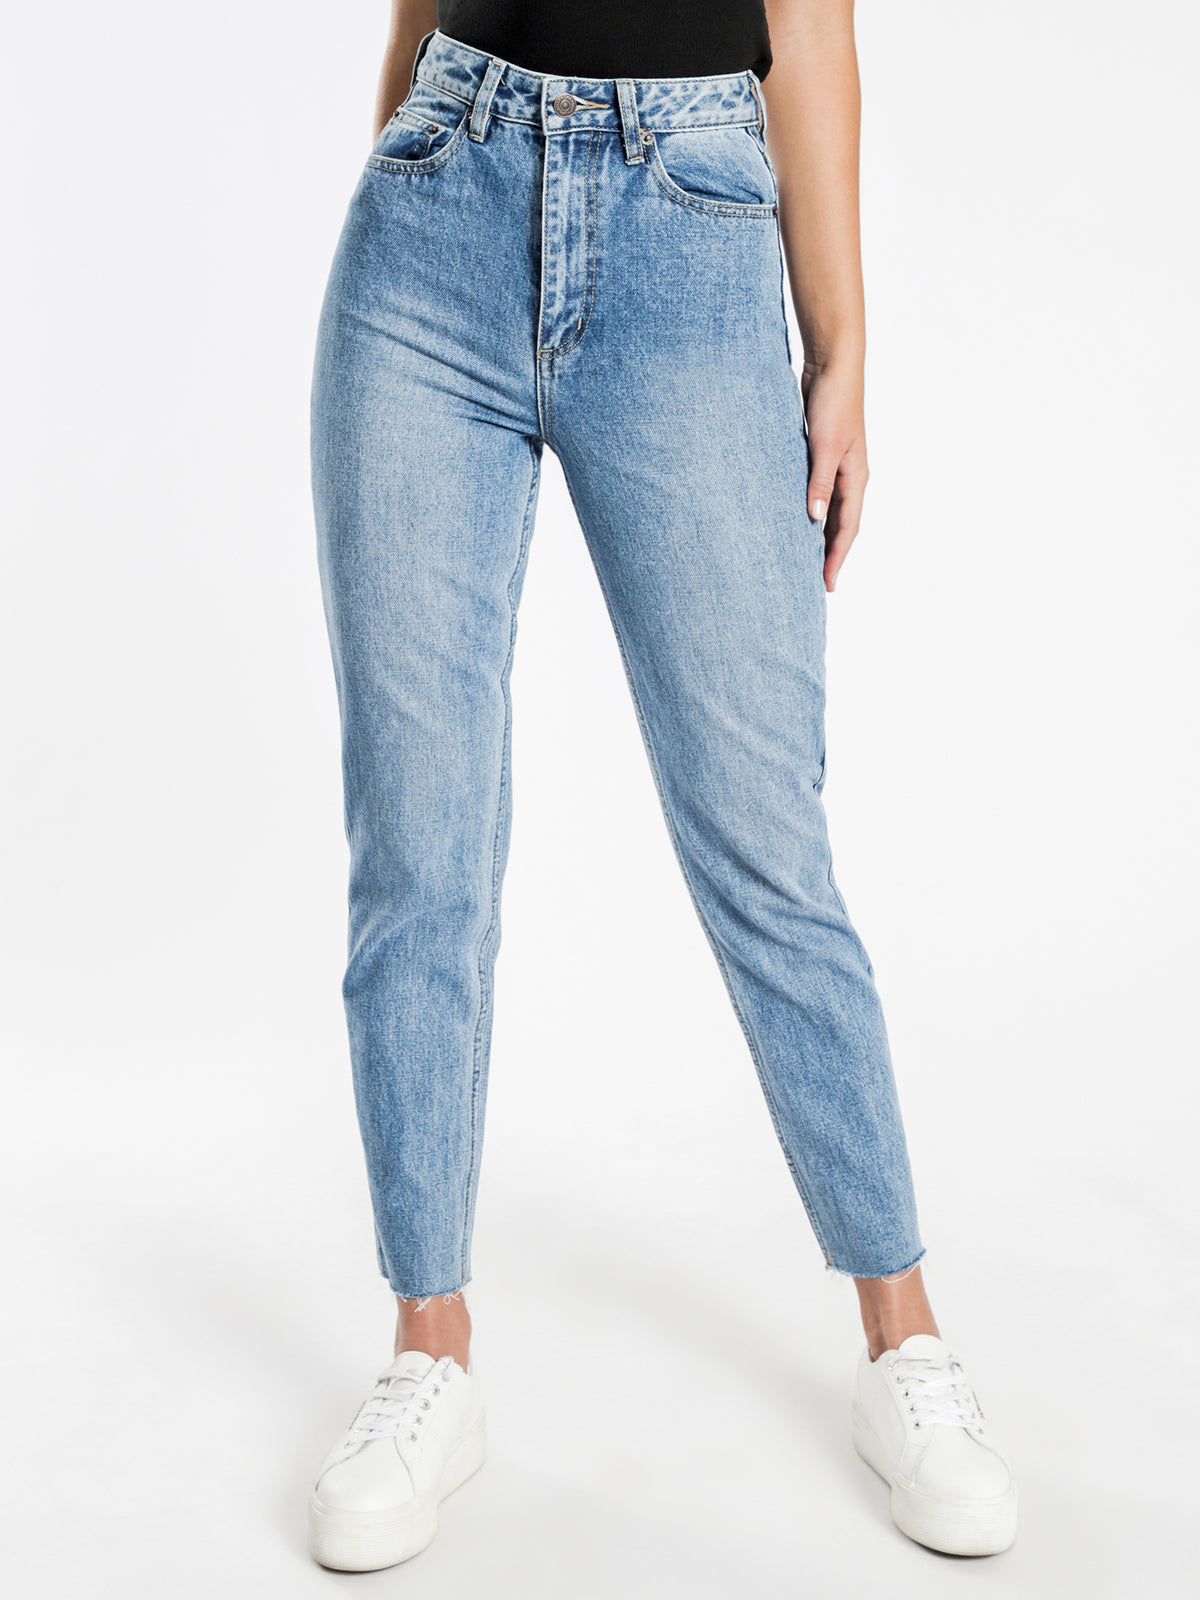 High Mom Jeans in Sublime Blue Denim